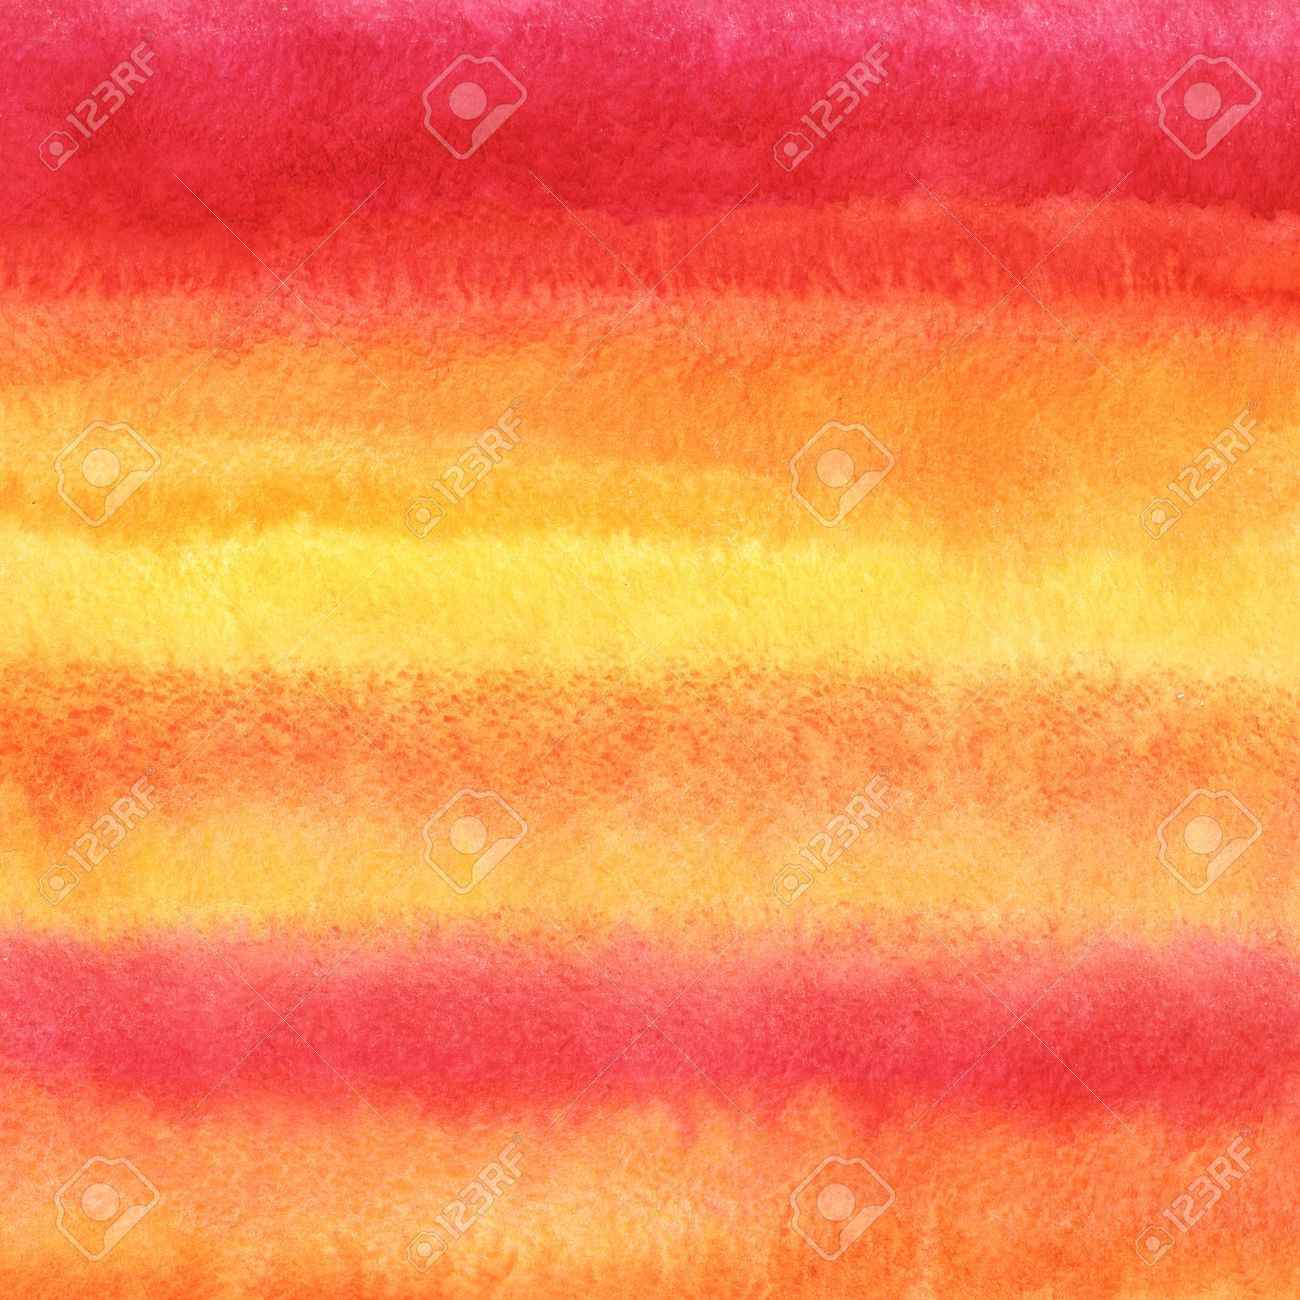 Abstract Watercolor Background Striped Gradient Fill Orange